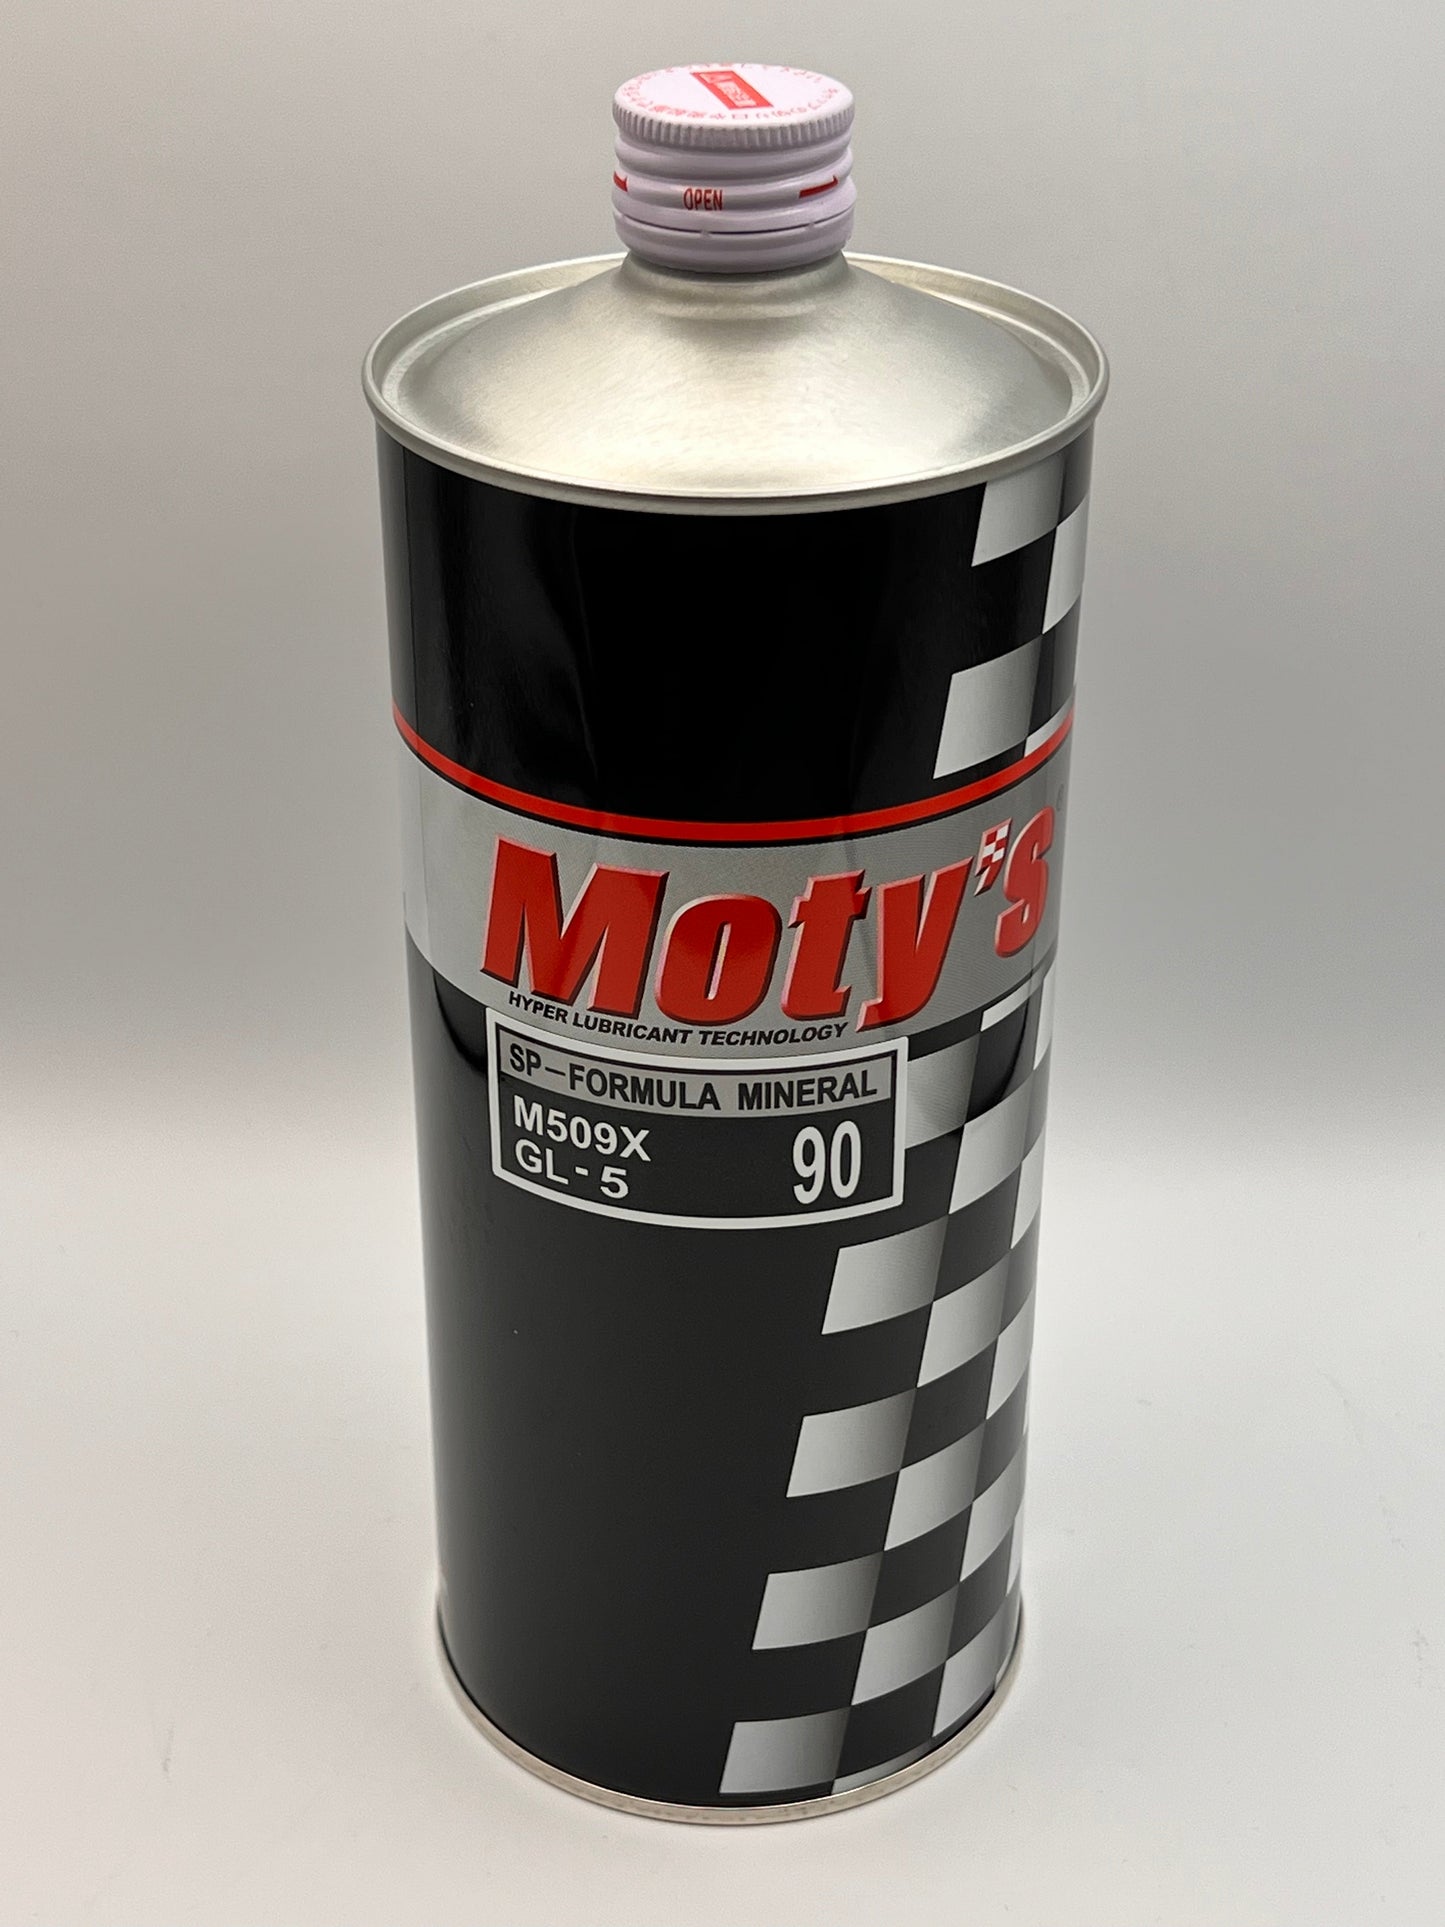 Moty's Gear Oil Specialized Mineral Oil M509X (90) 1 Litre Can